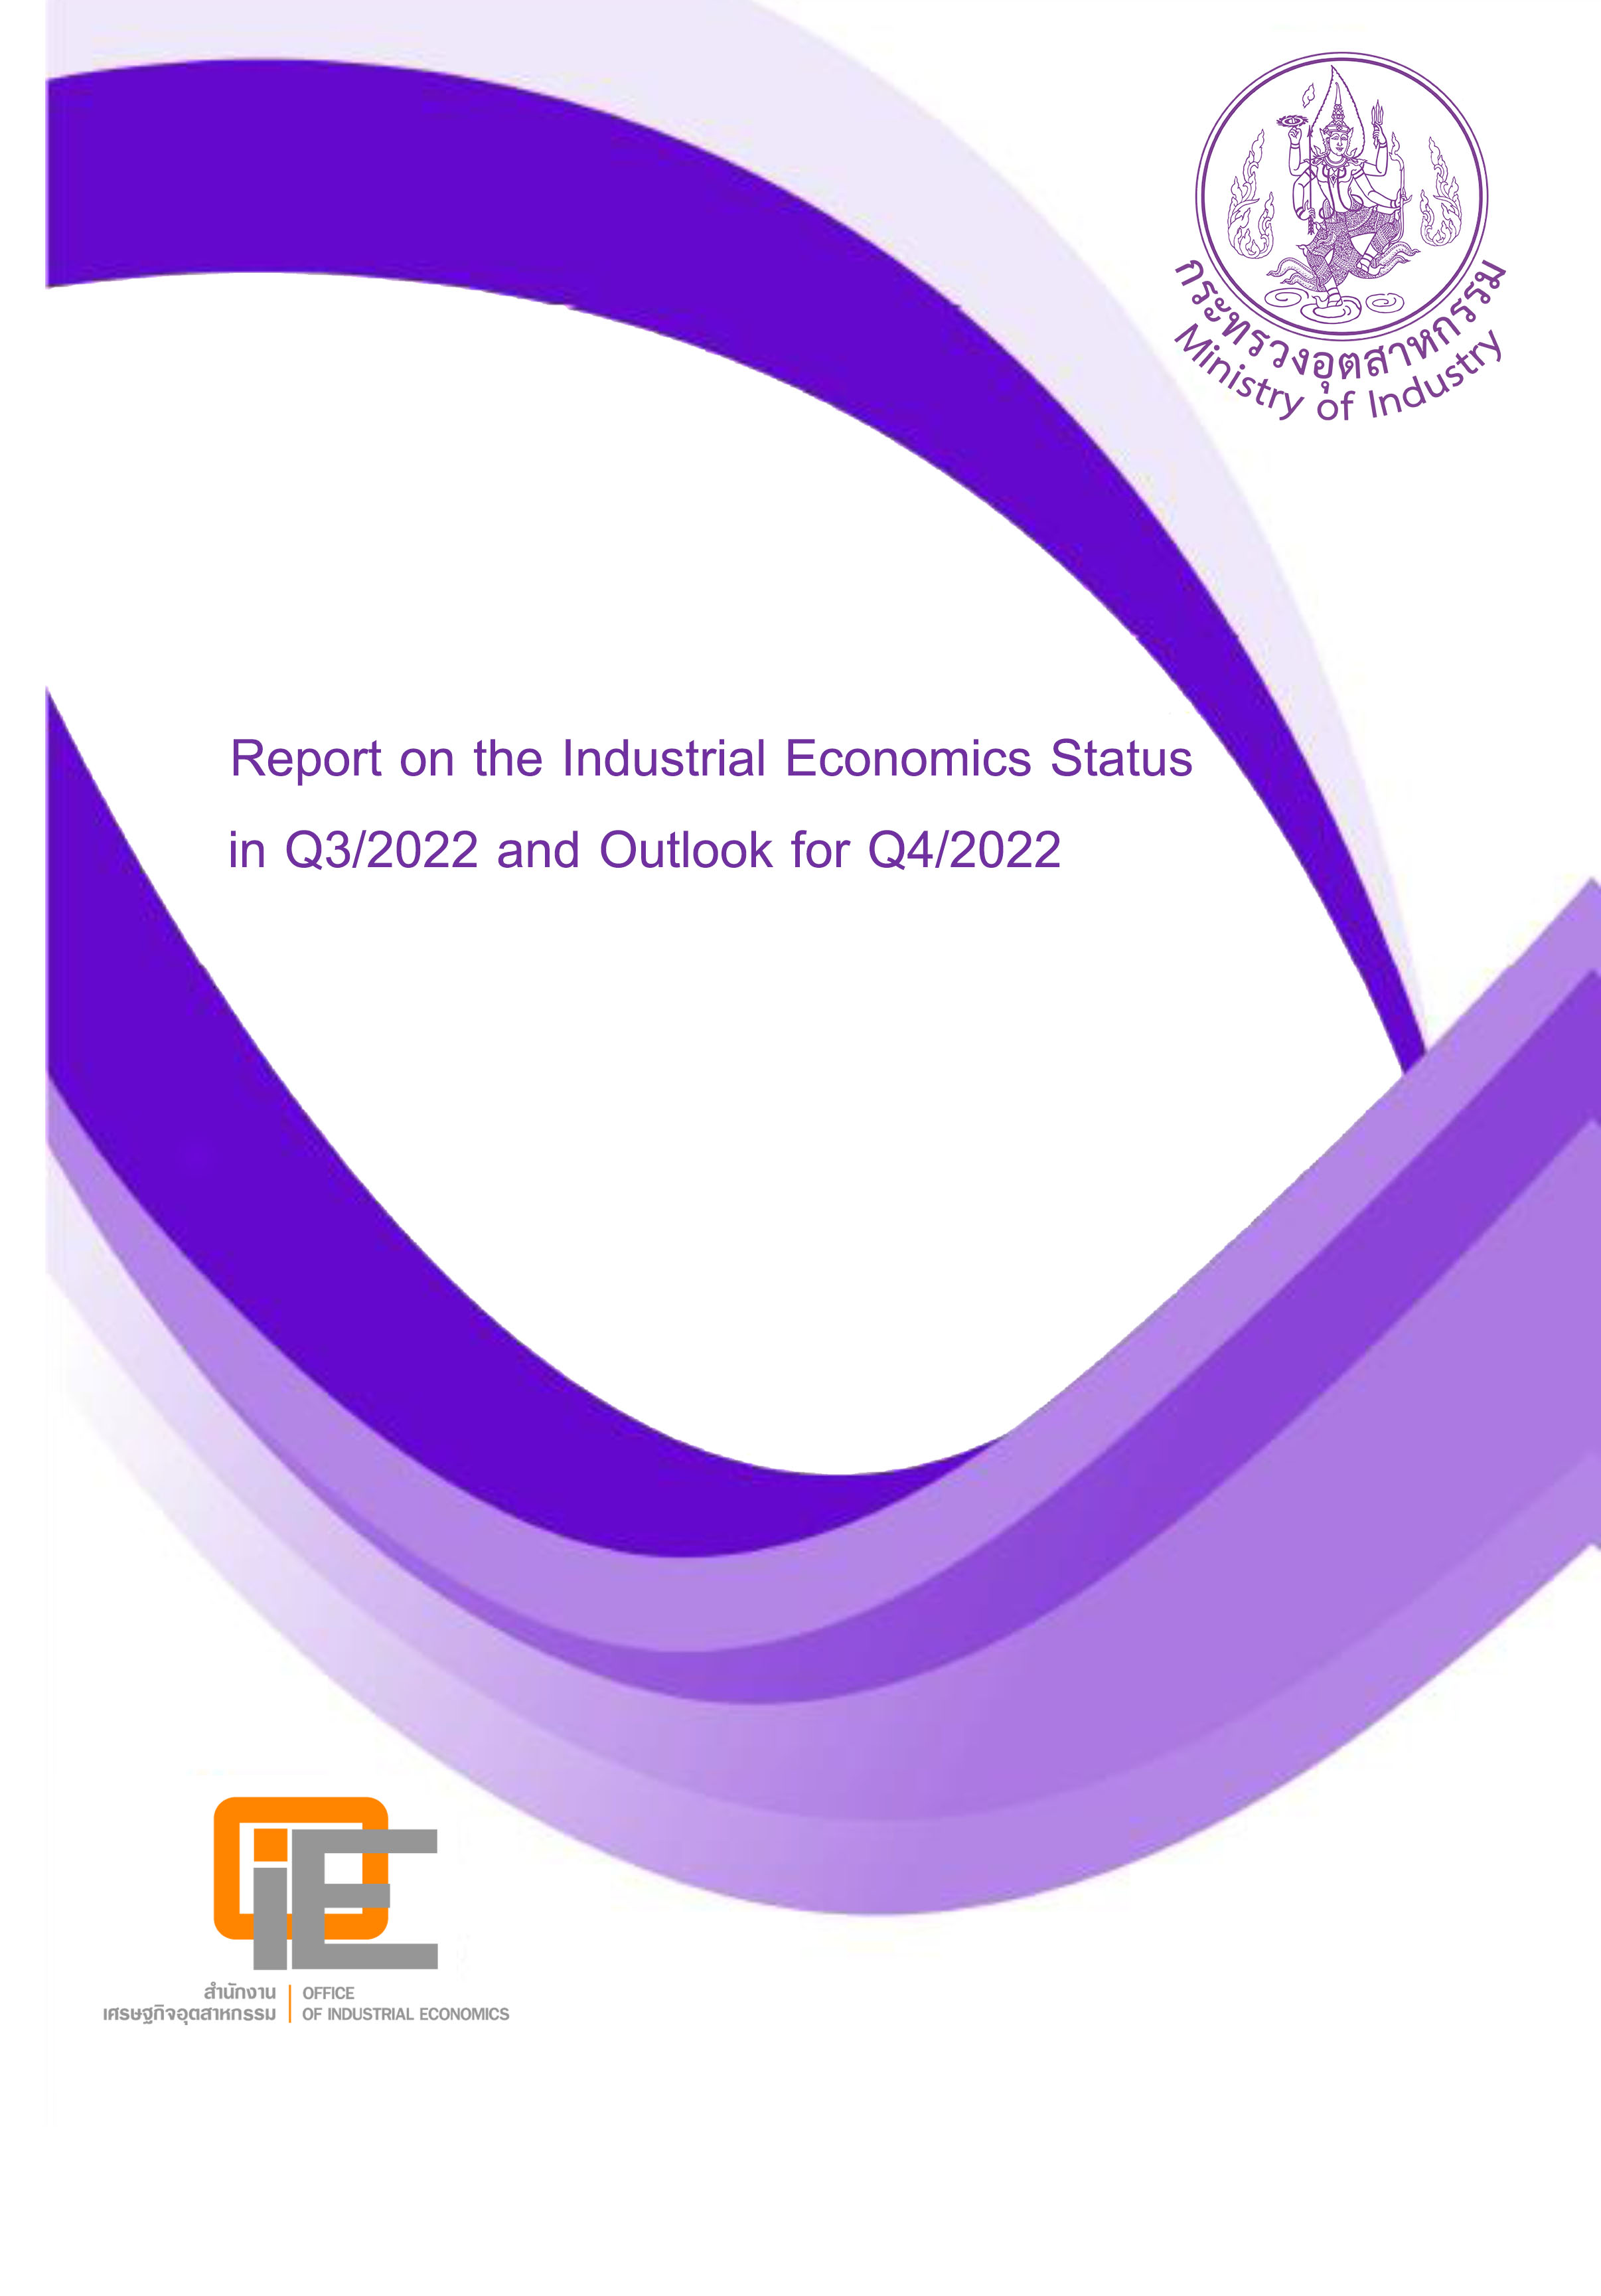 Report on the Industrial Economics Status in Q3/2022 and Outlook for Q4/2022